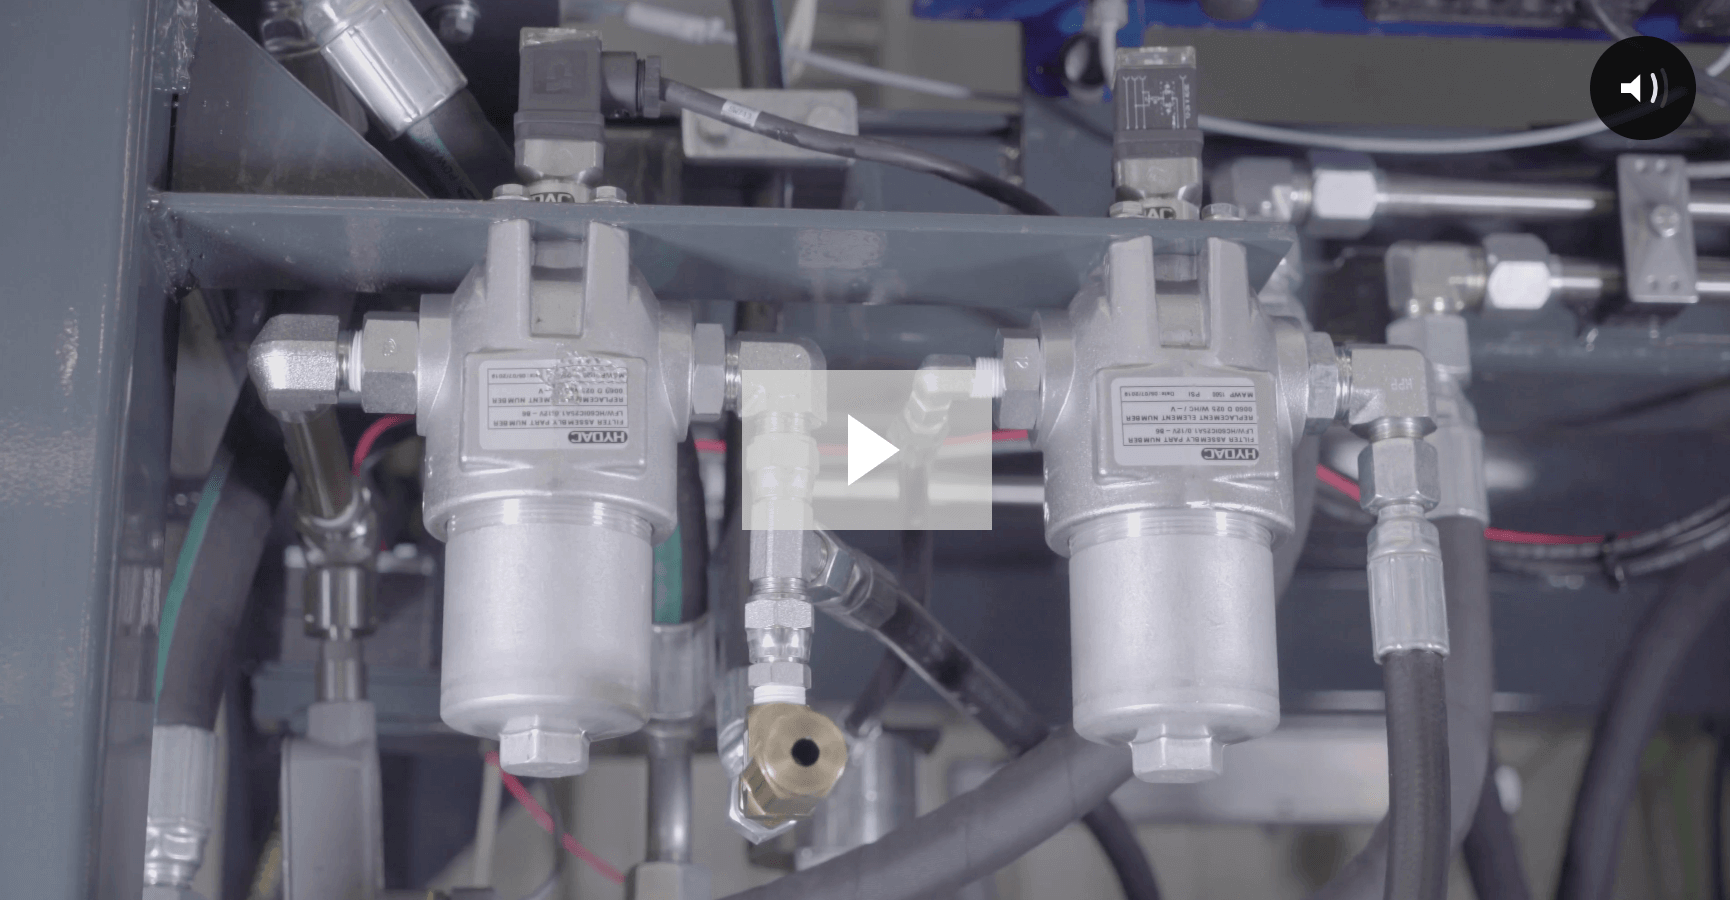 Triple Your CNC Production with Automated Coolant Delivery [Video]